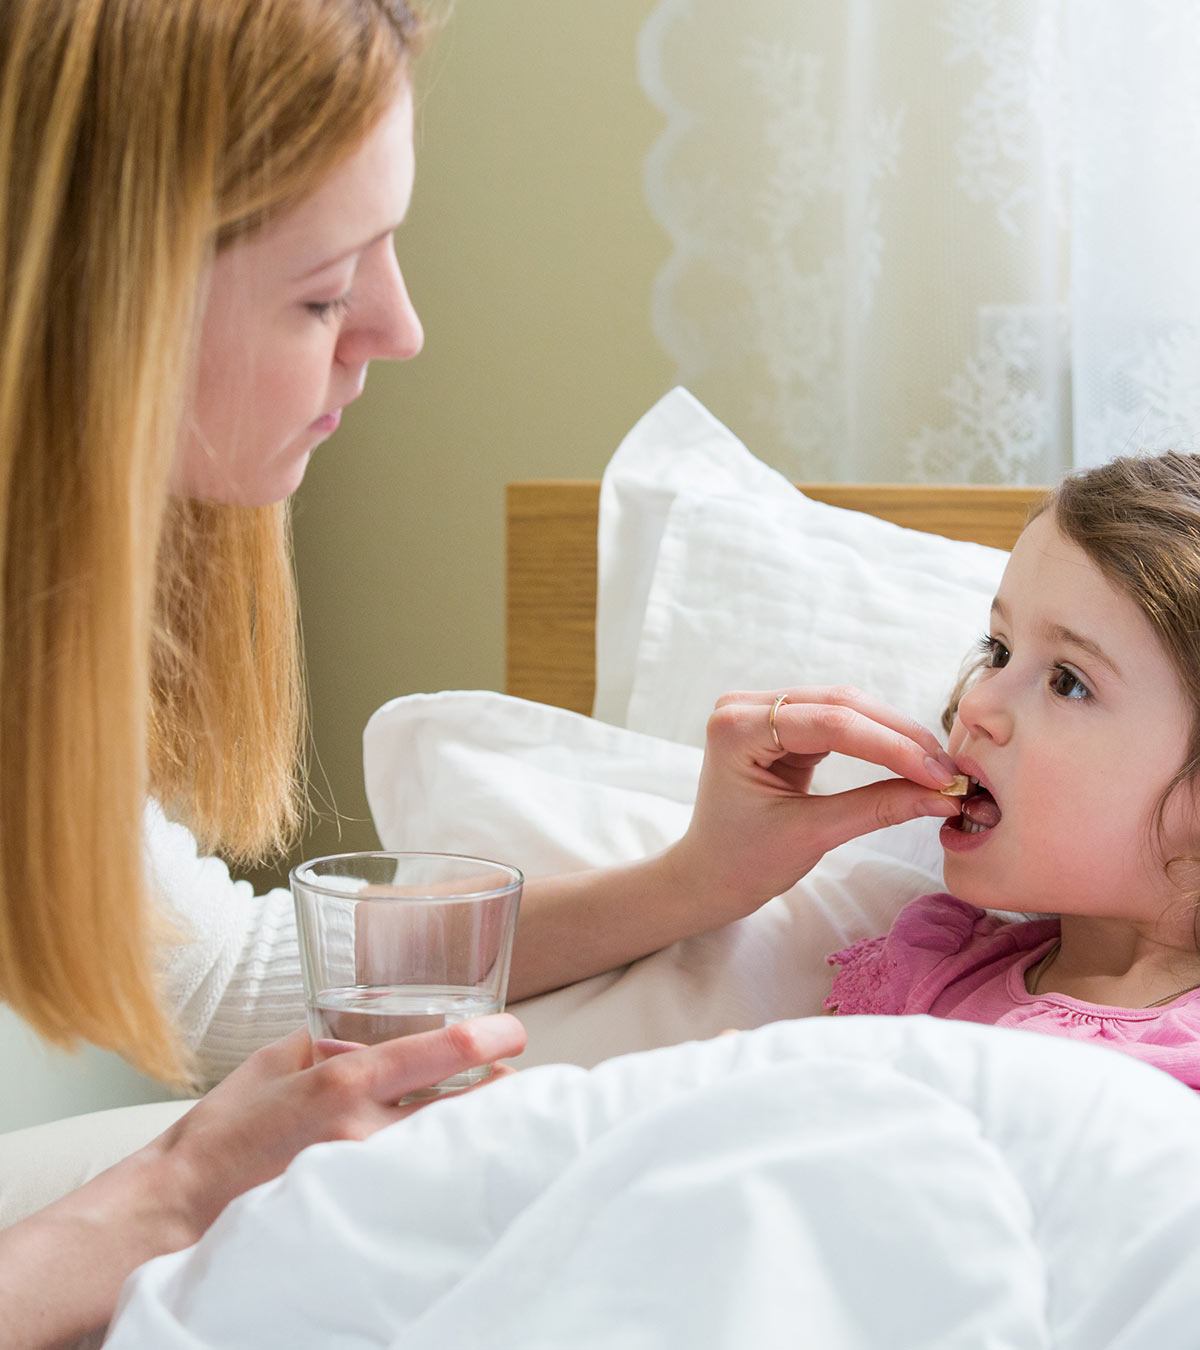 Tylenol (Acetaminophen) For Kids: Its Dosage, Side-Effects And Precautions